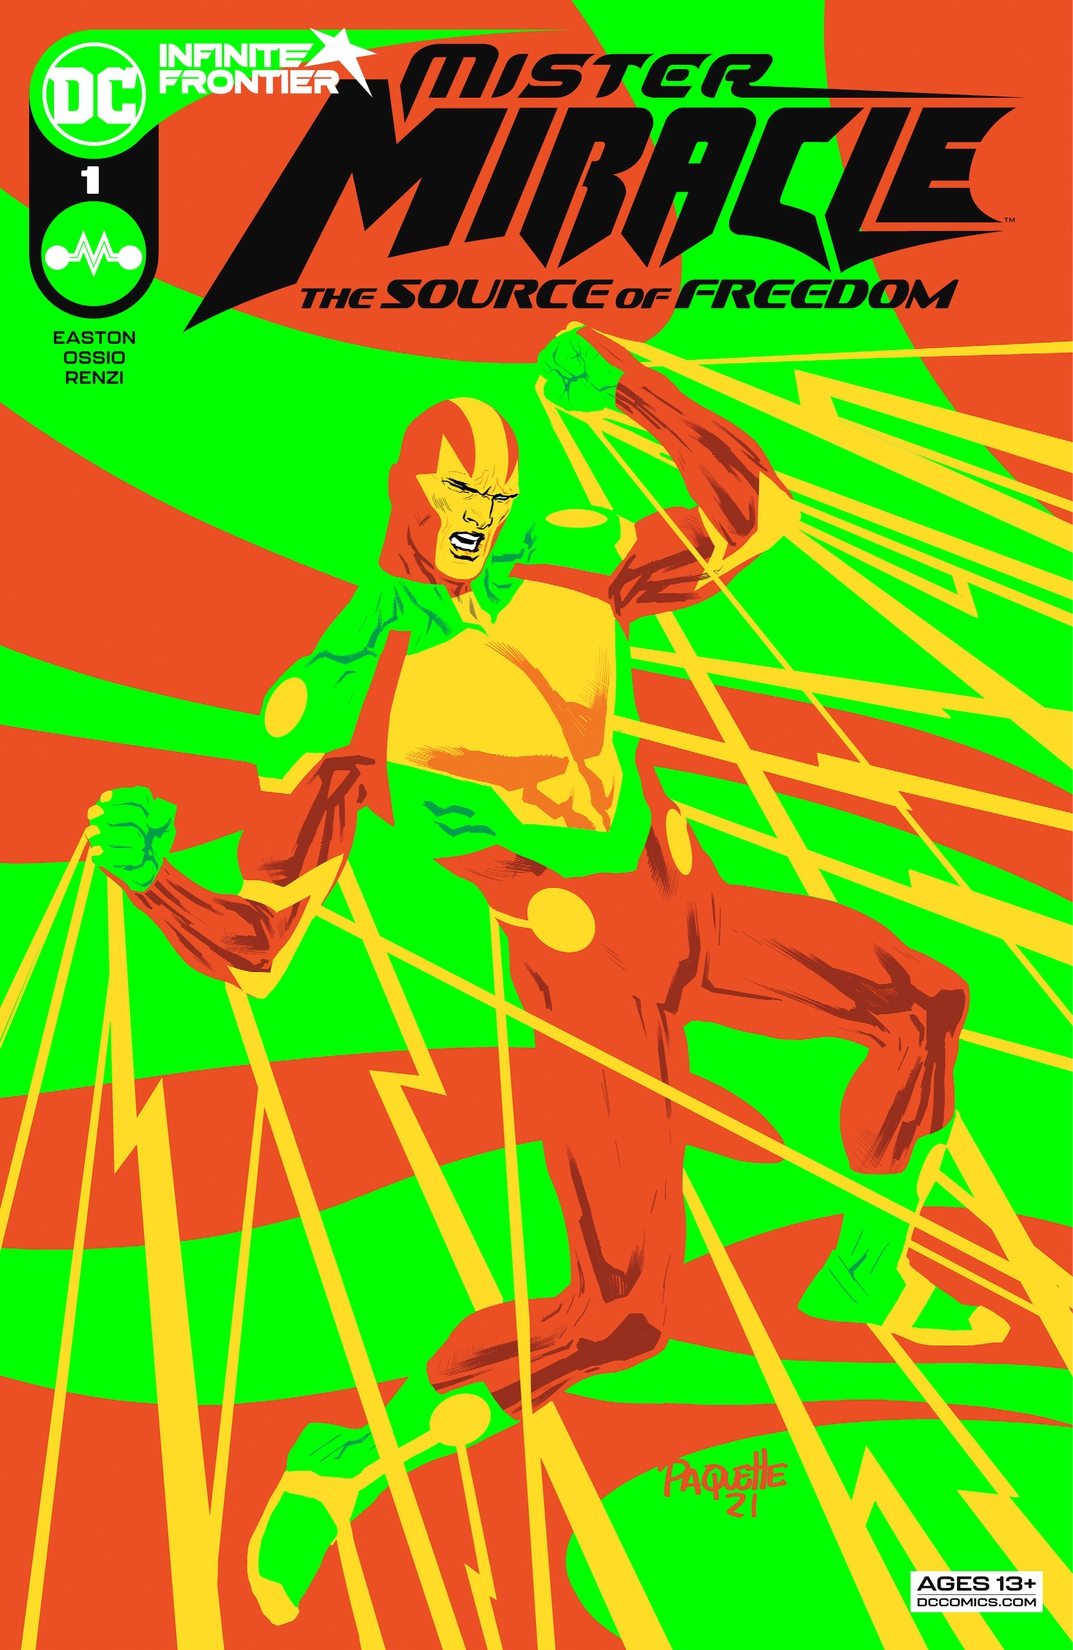 Mister Miracle: The Source of Freedom #1 preview images